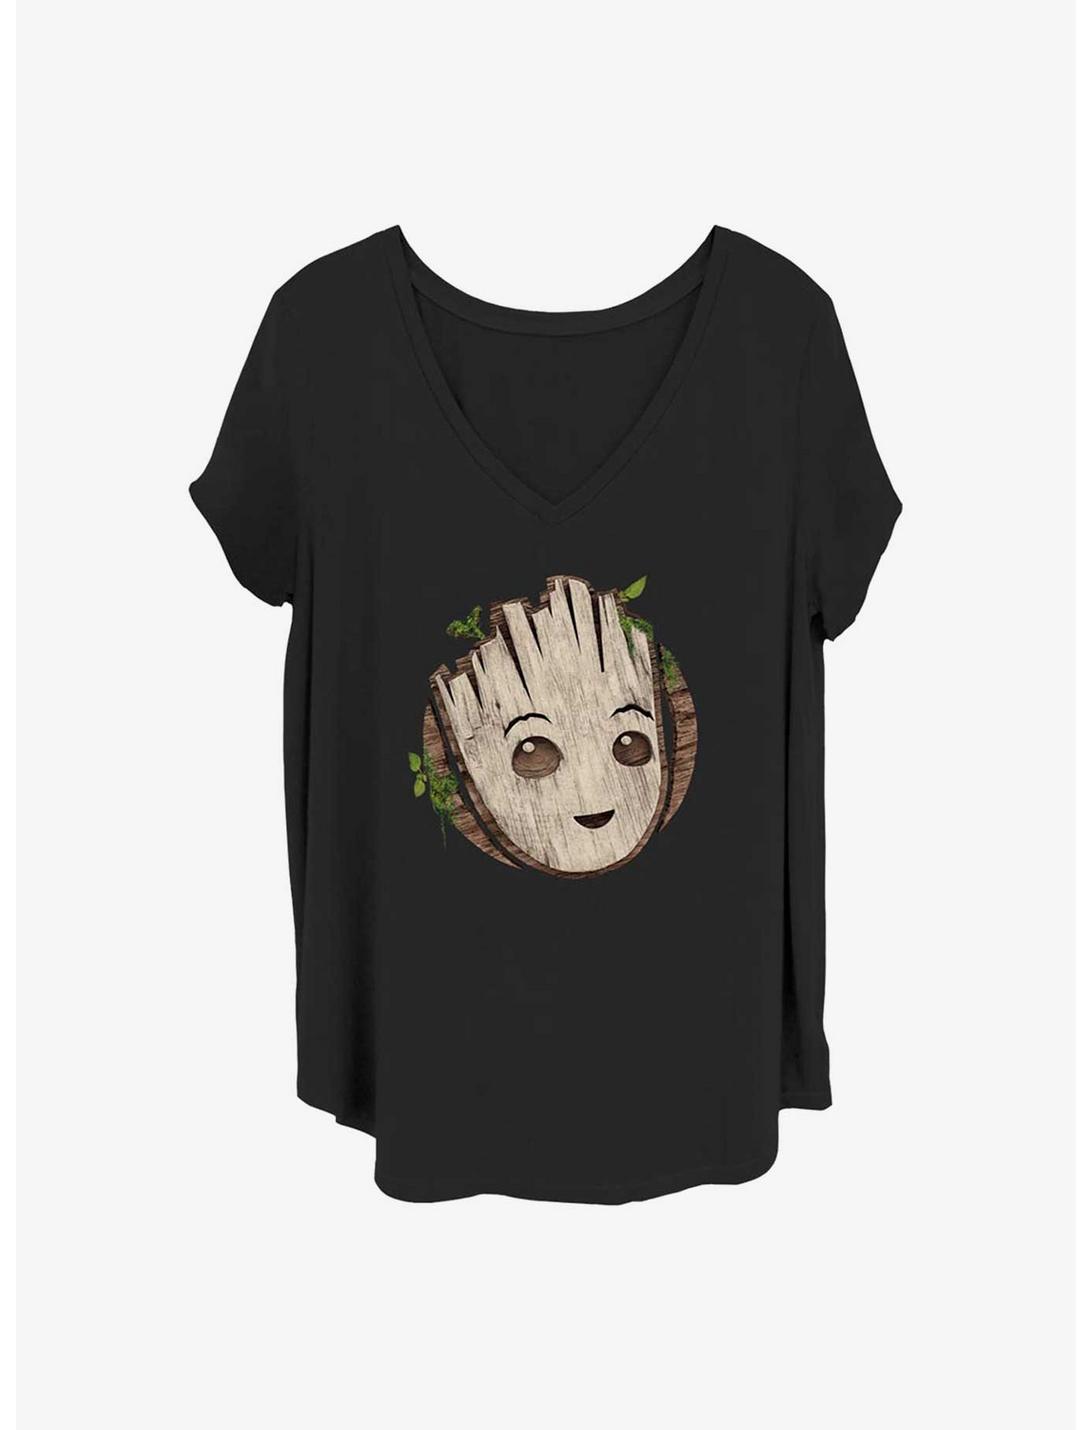 Marvel Guardians of the Galaxy Groot Head Girls T-Shirt Plus Size, BLACK, hi-res